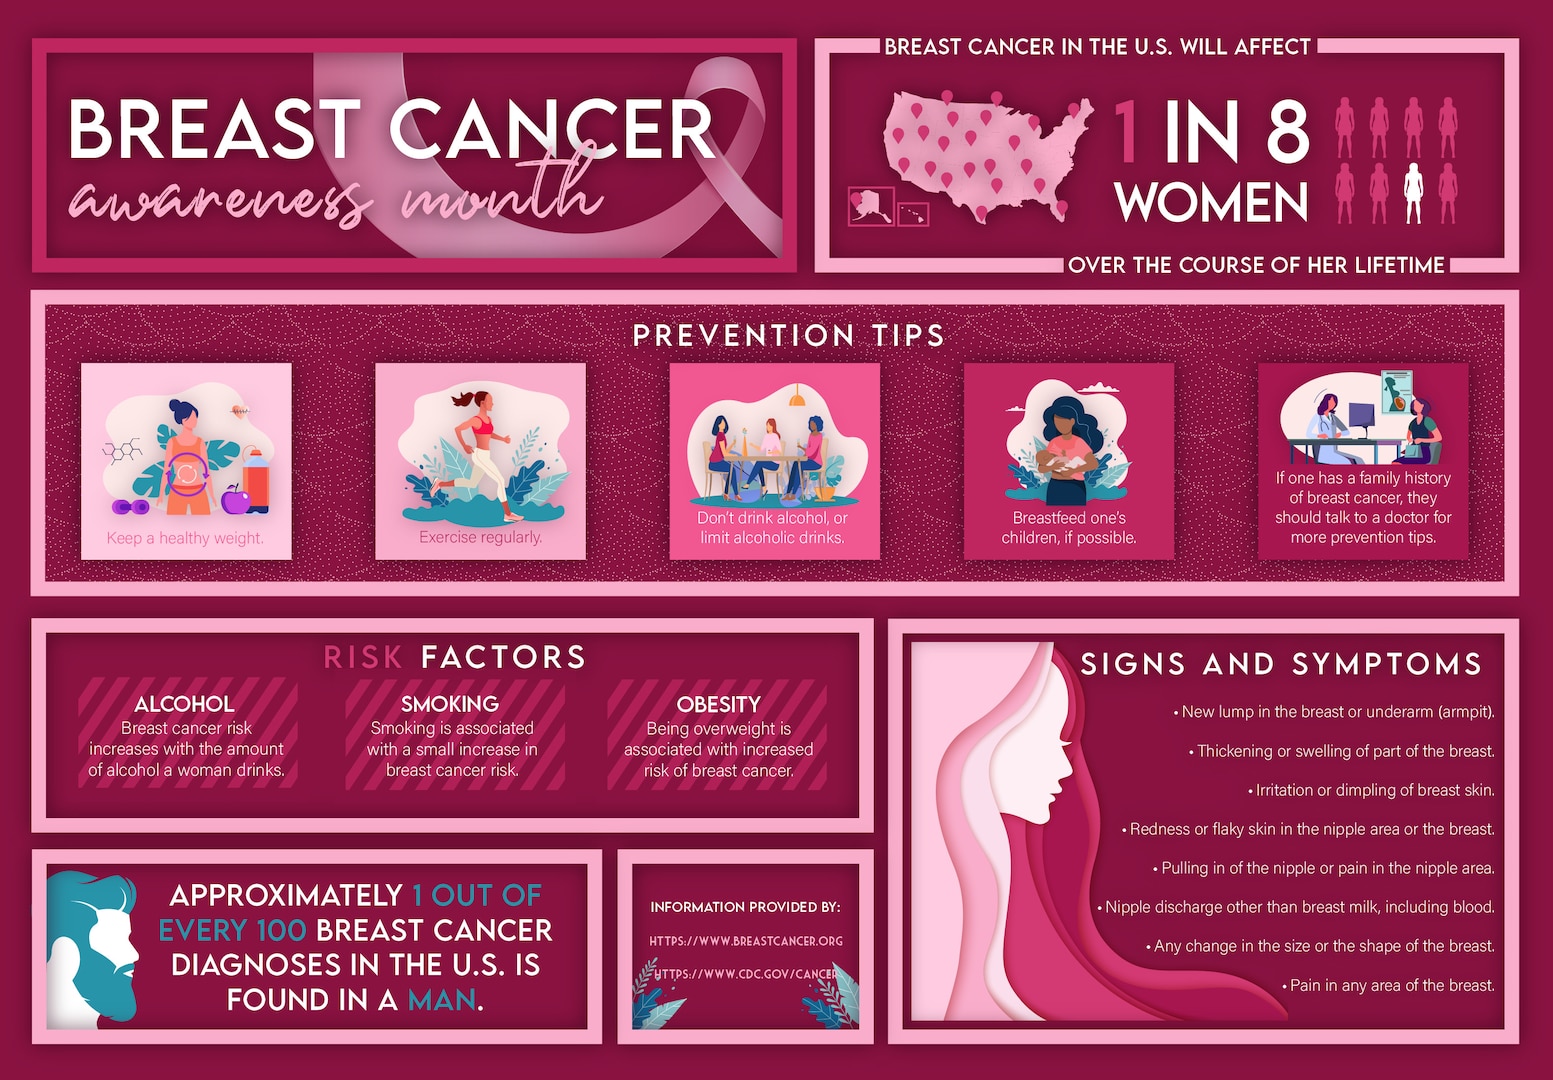 October is National Breast Cancer Awareness month, encouraging education about the importance of knowing the signs and symptoms of breast cancer. According to the Centers for Disease Control and Prevention, one in eight women in the United States will be diagnosed with breast cancer in their lifetime, so it’s important to know the symptoms and risk factors. (U.S. Space Force graphic by Airman 1st Class Amanda Lovelace)